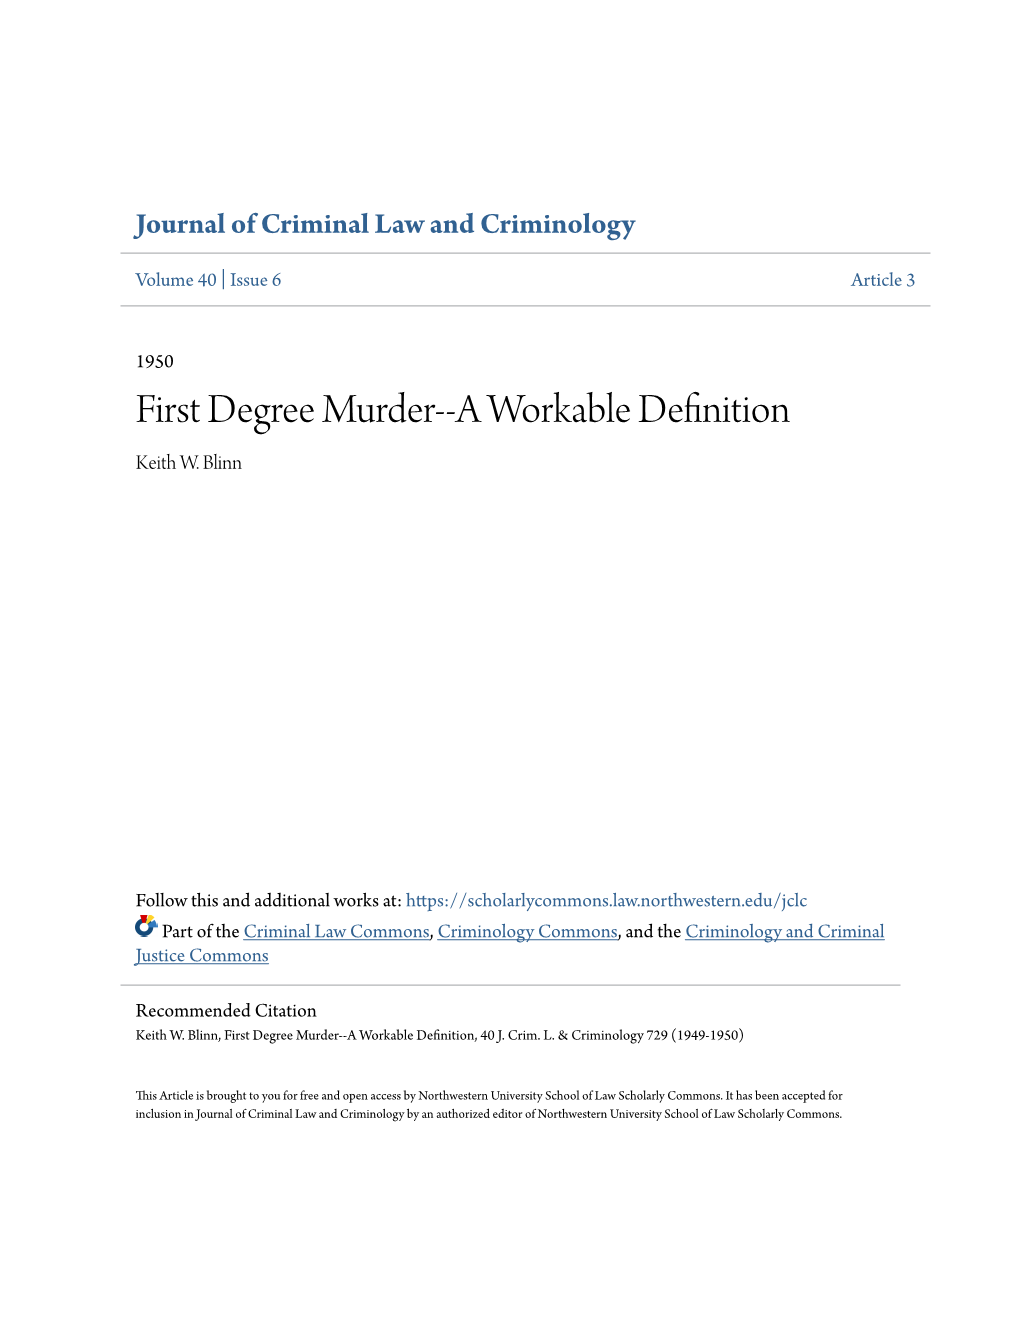 First Degree Murder--A Workable Definition Keith W